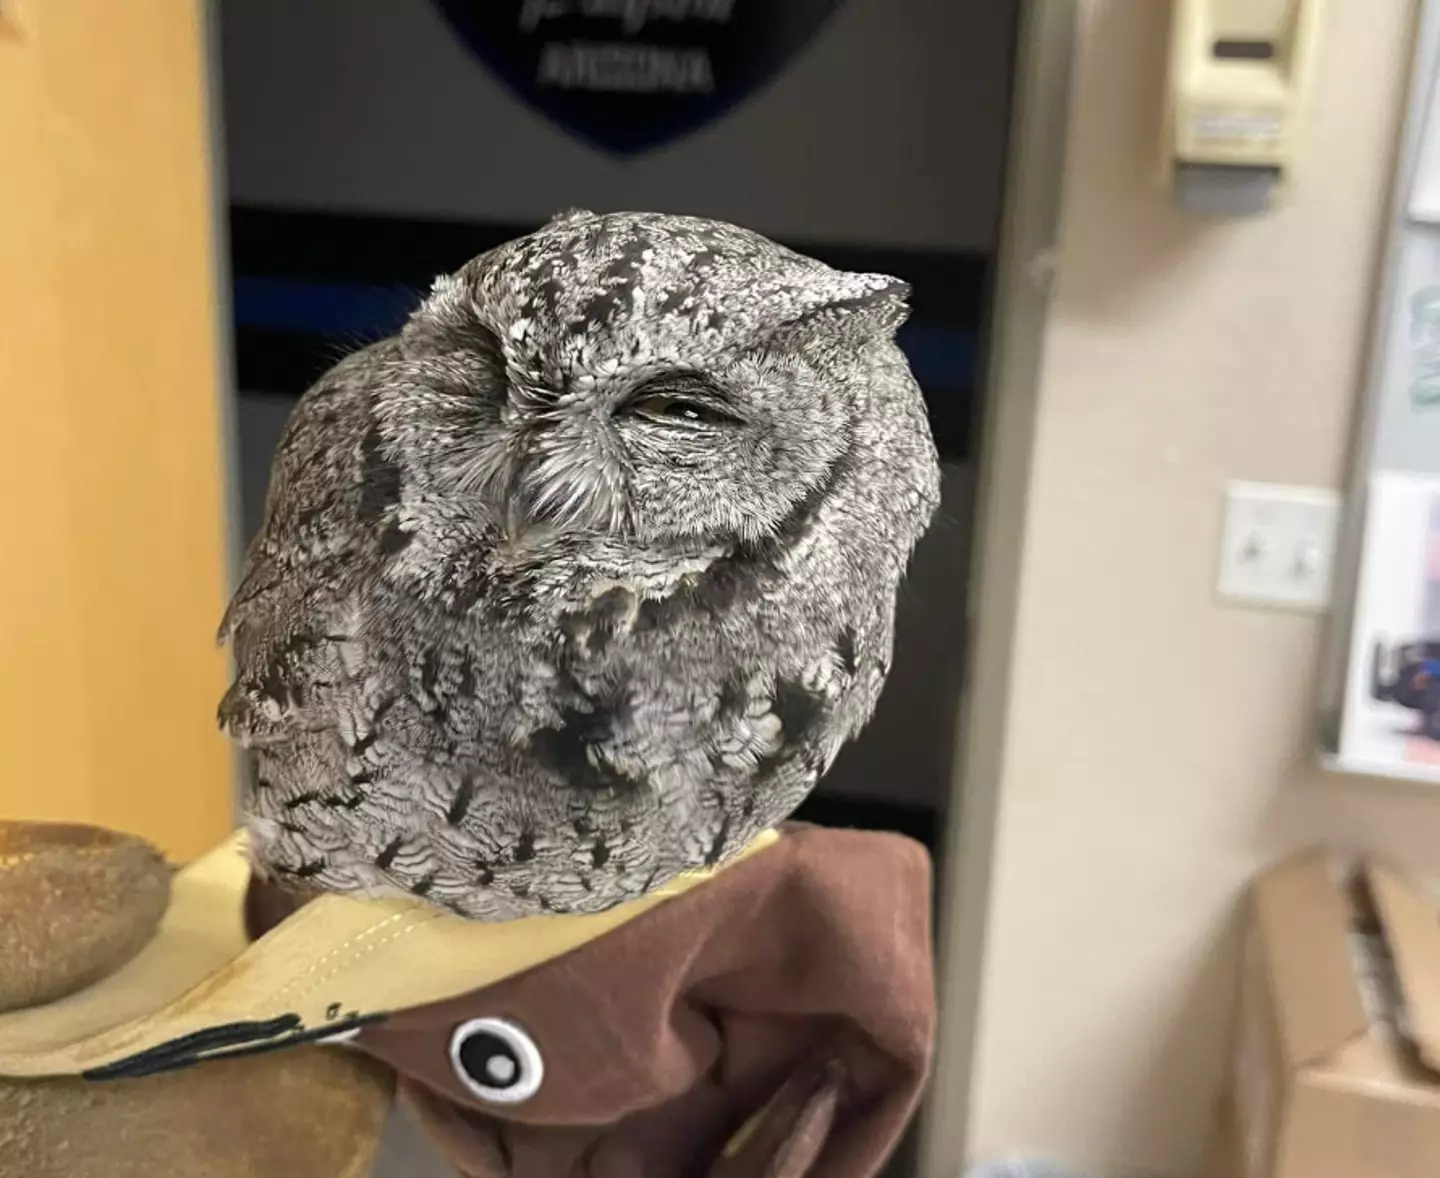 The owl was found in the car with the driver.